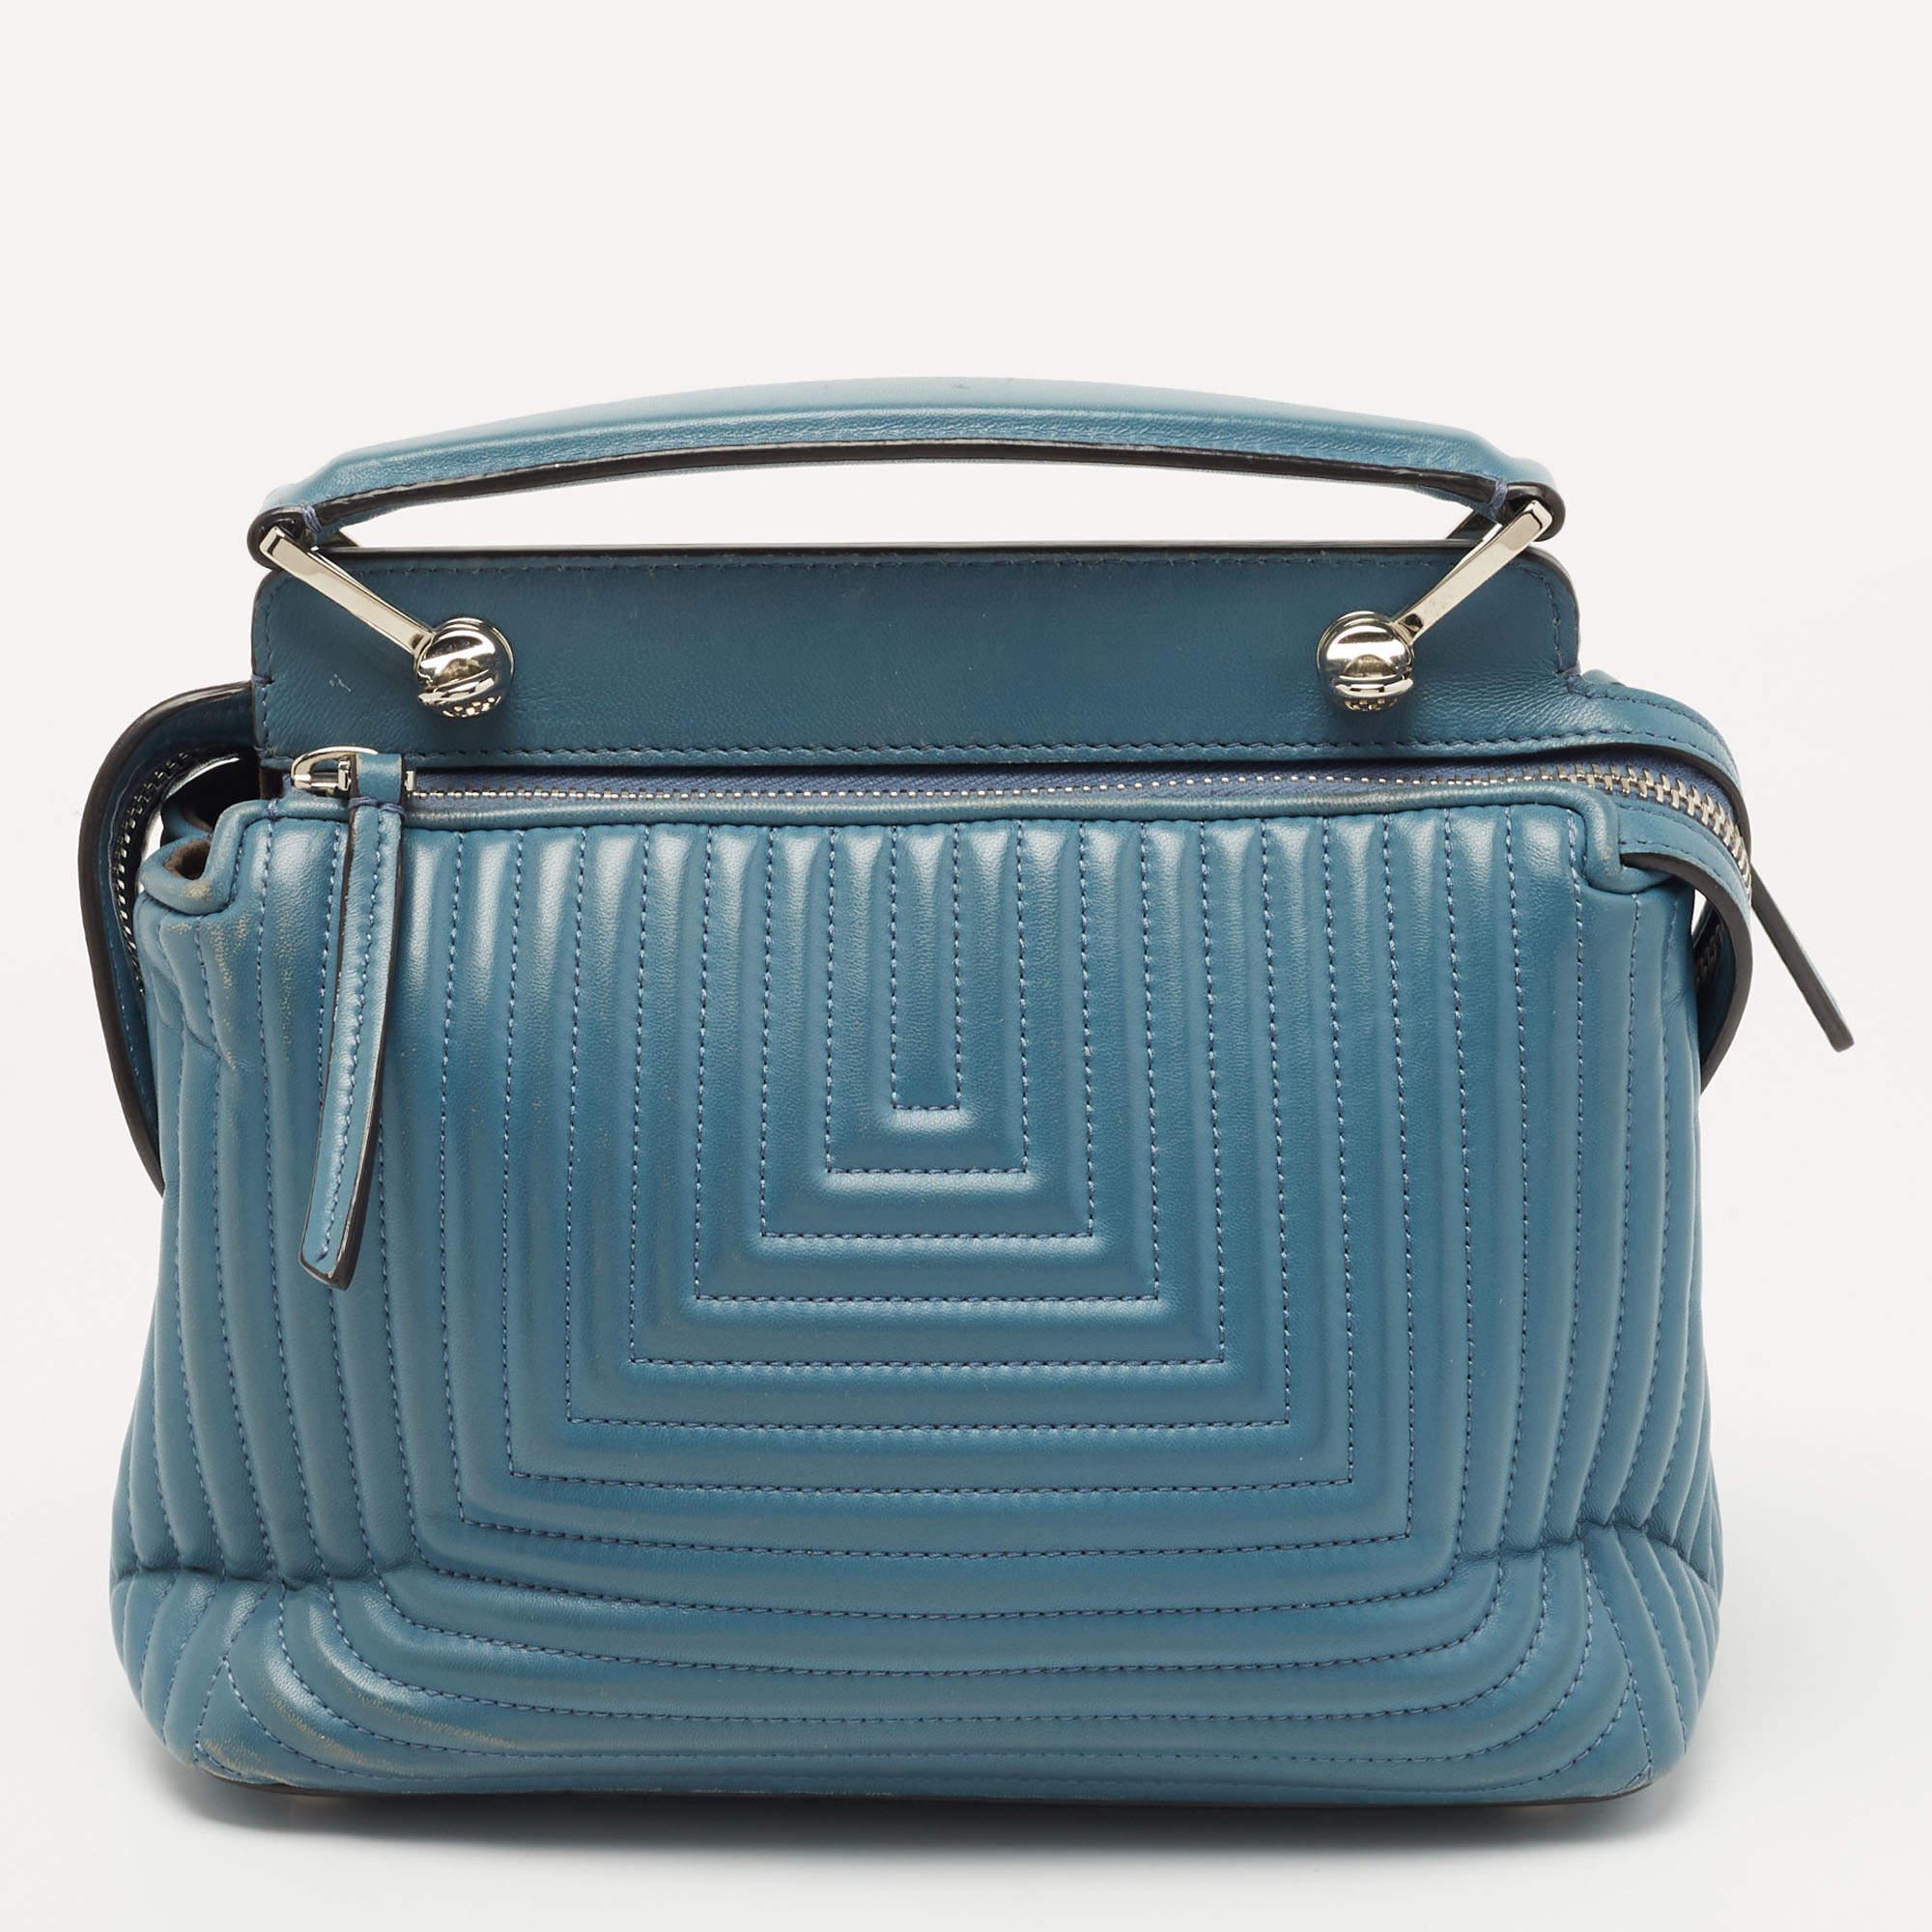 Exuding unparalleled elegance and sophistication, this bag is made from the finest material in a gorgeous hue. While the roomy interior offers ample space, the top handle allows you to carry it with much elegance.

Includes: Detachable Strap,